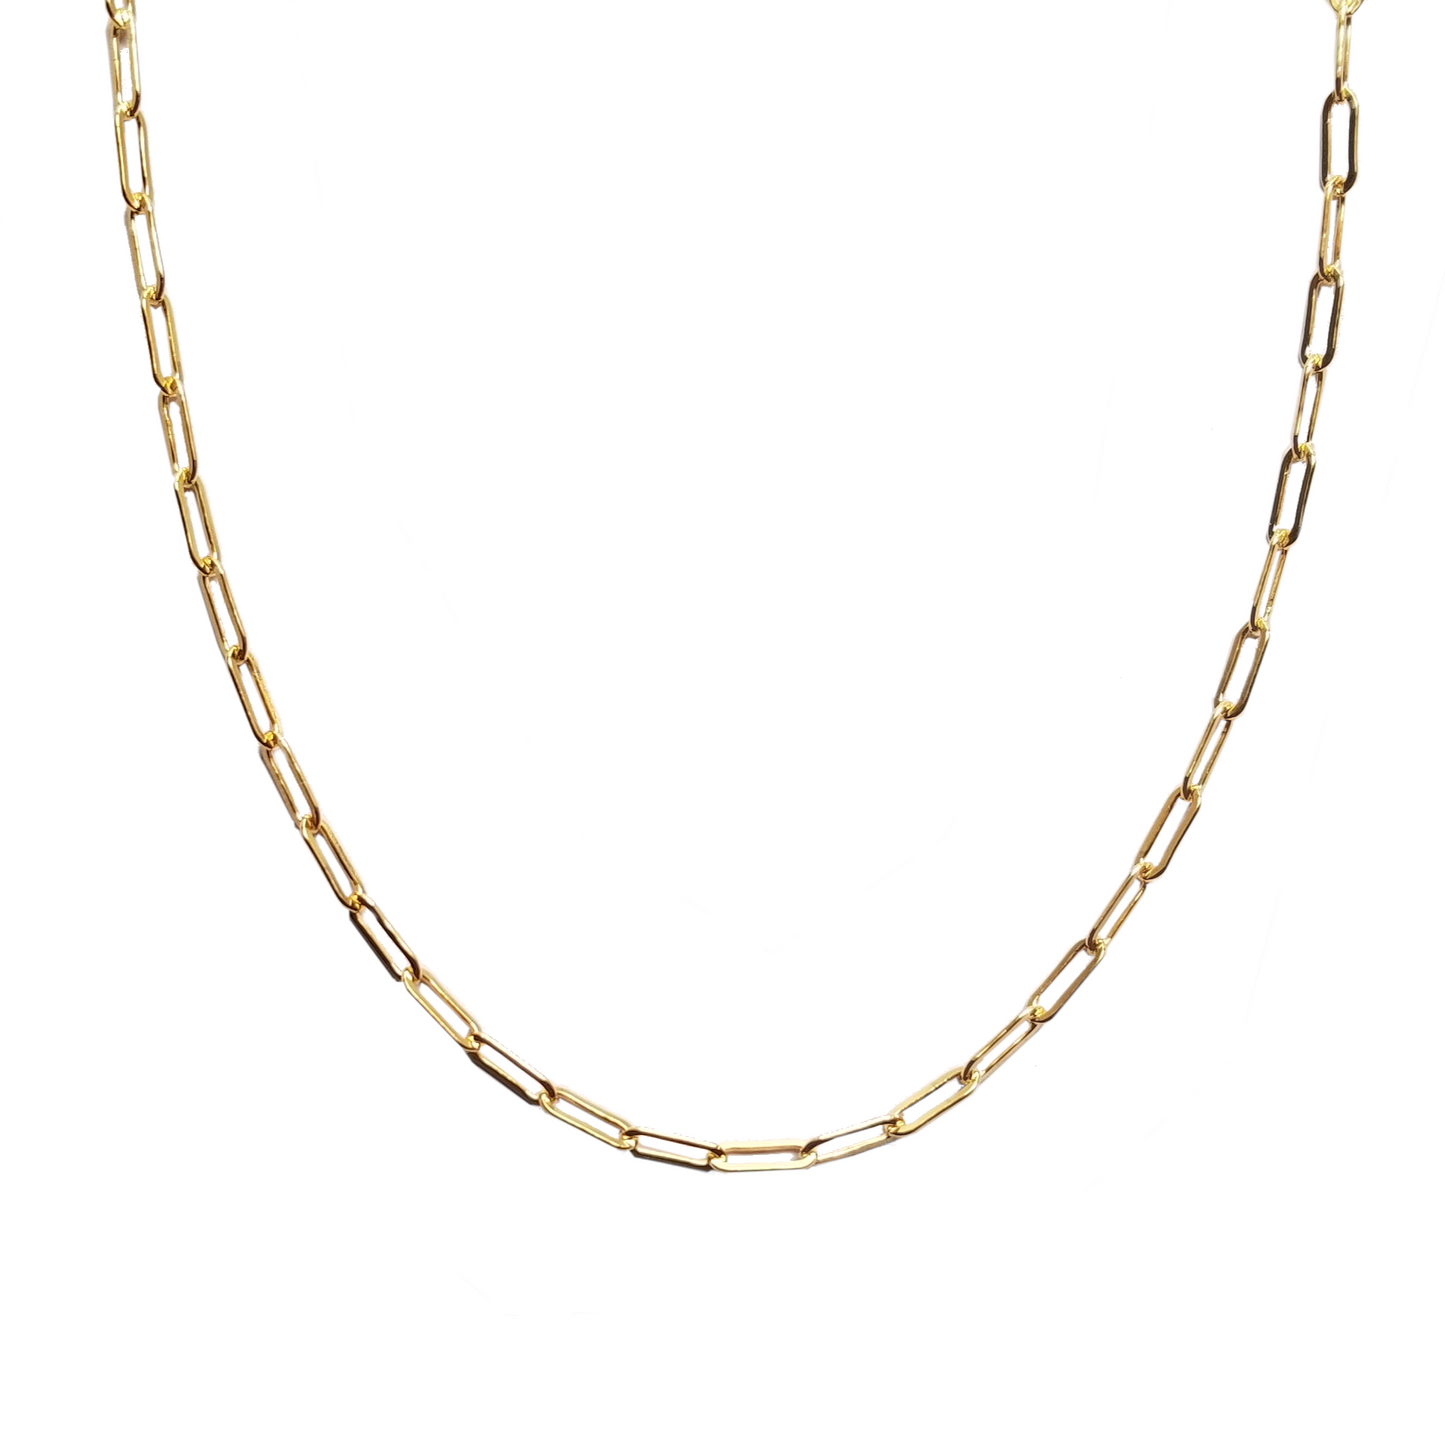 Gold necklace with elongated links